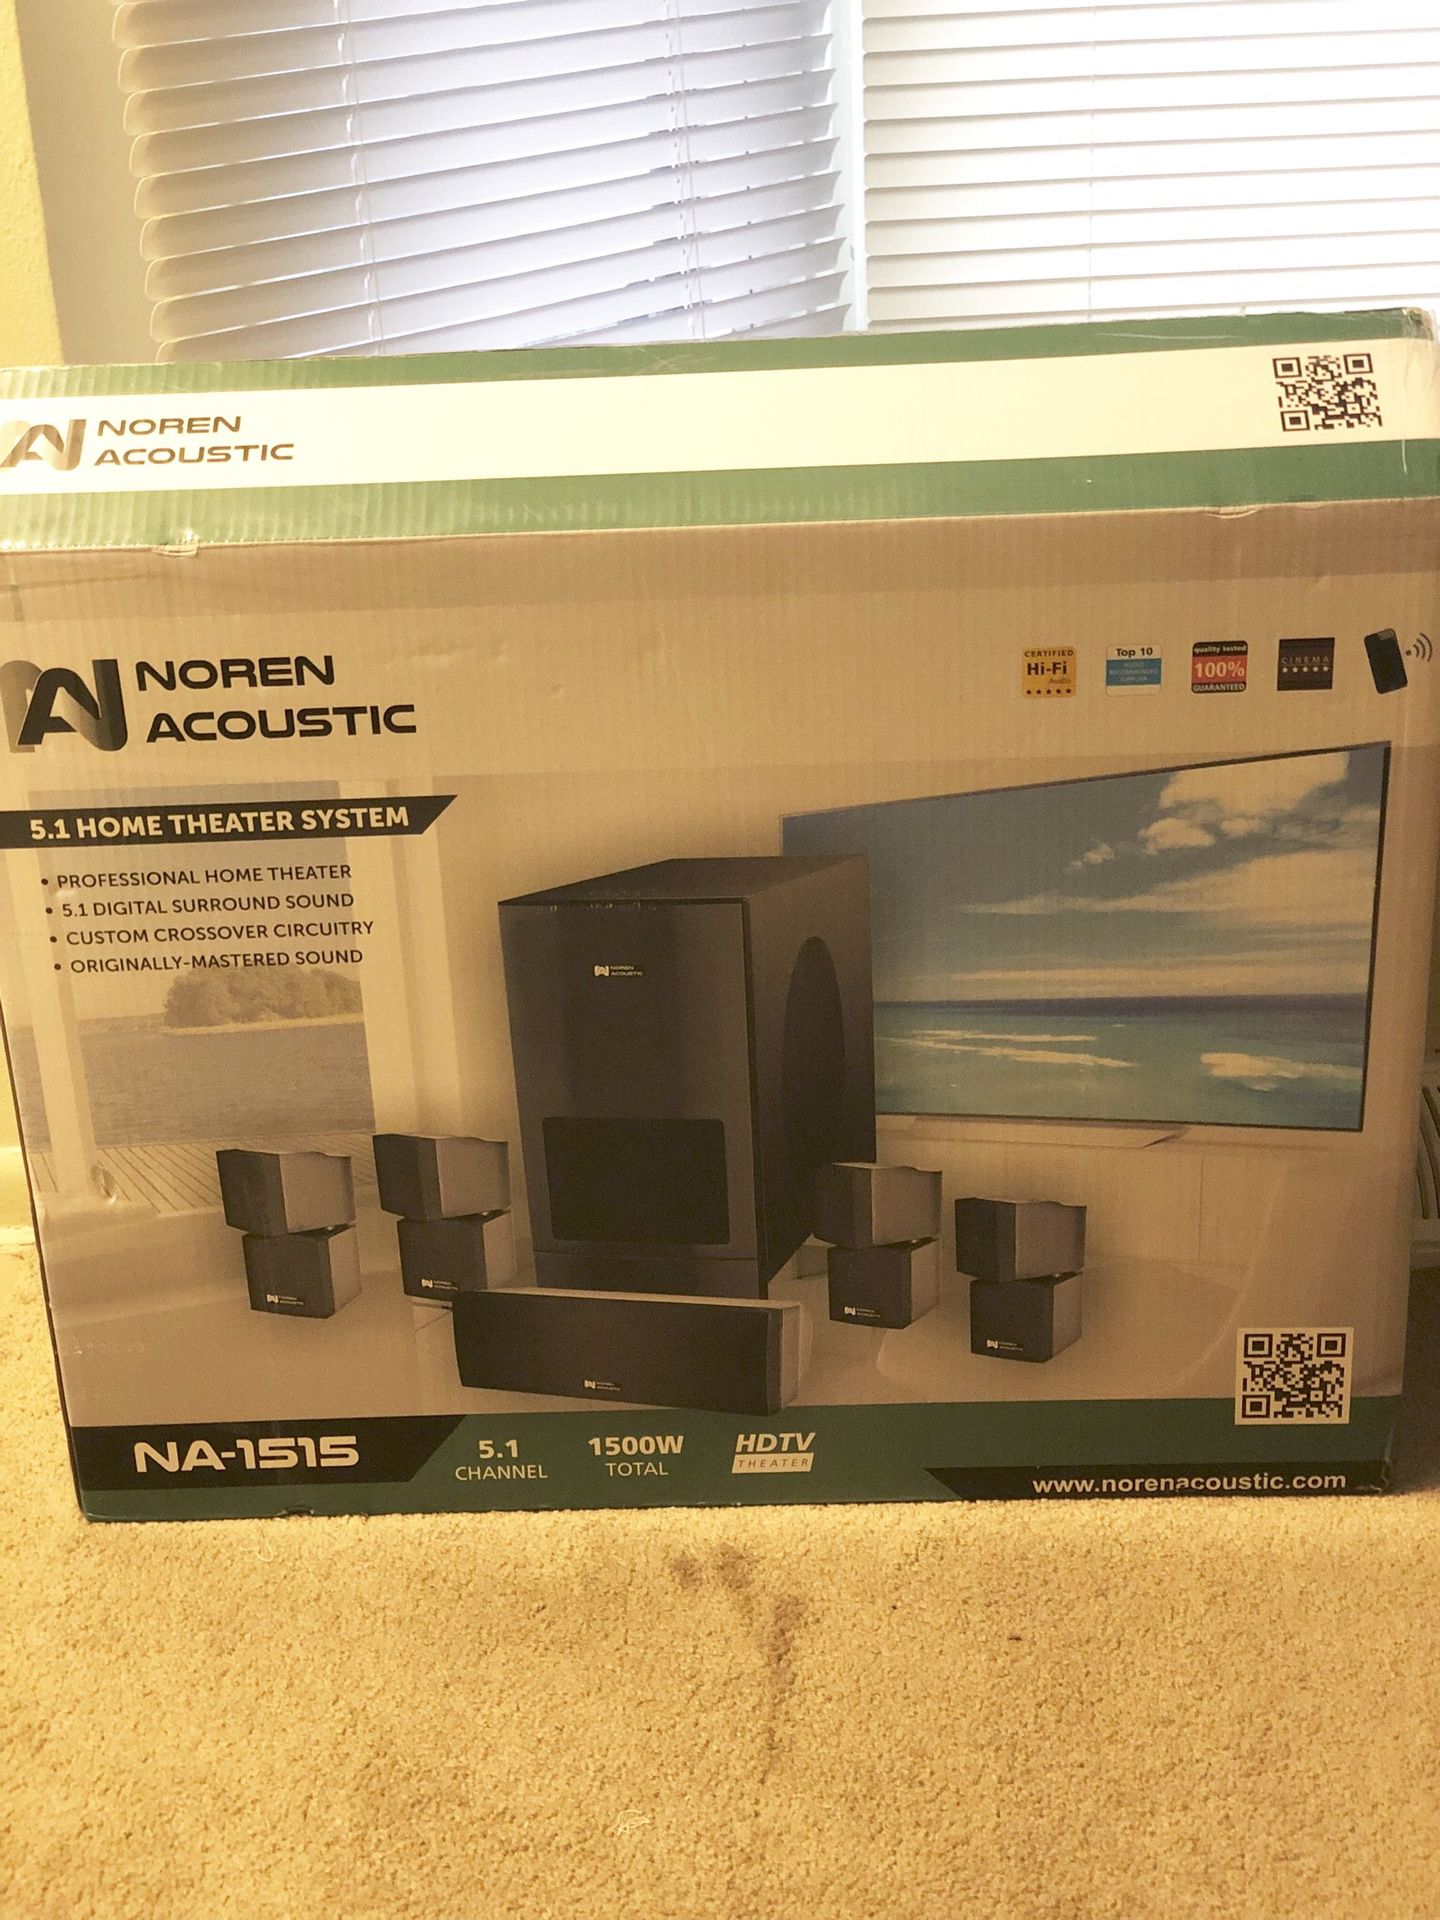 (BRAND NEW) Noren Acoustic 5.1 Home Theater System